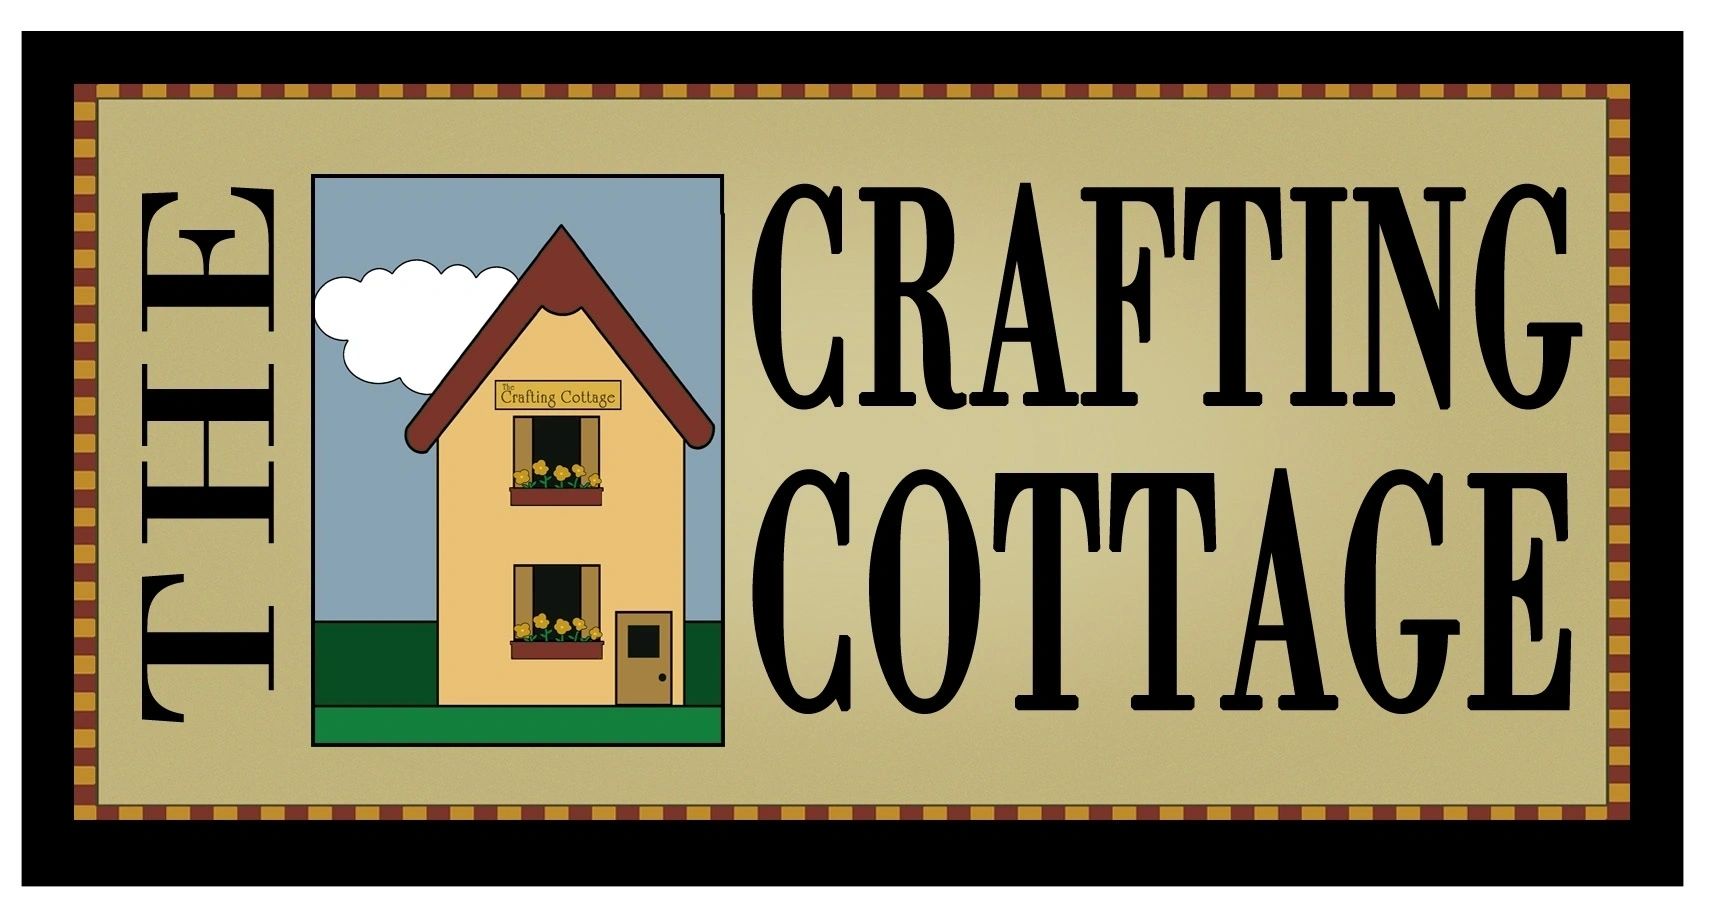 The Crafting Cottage & Inn